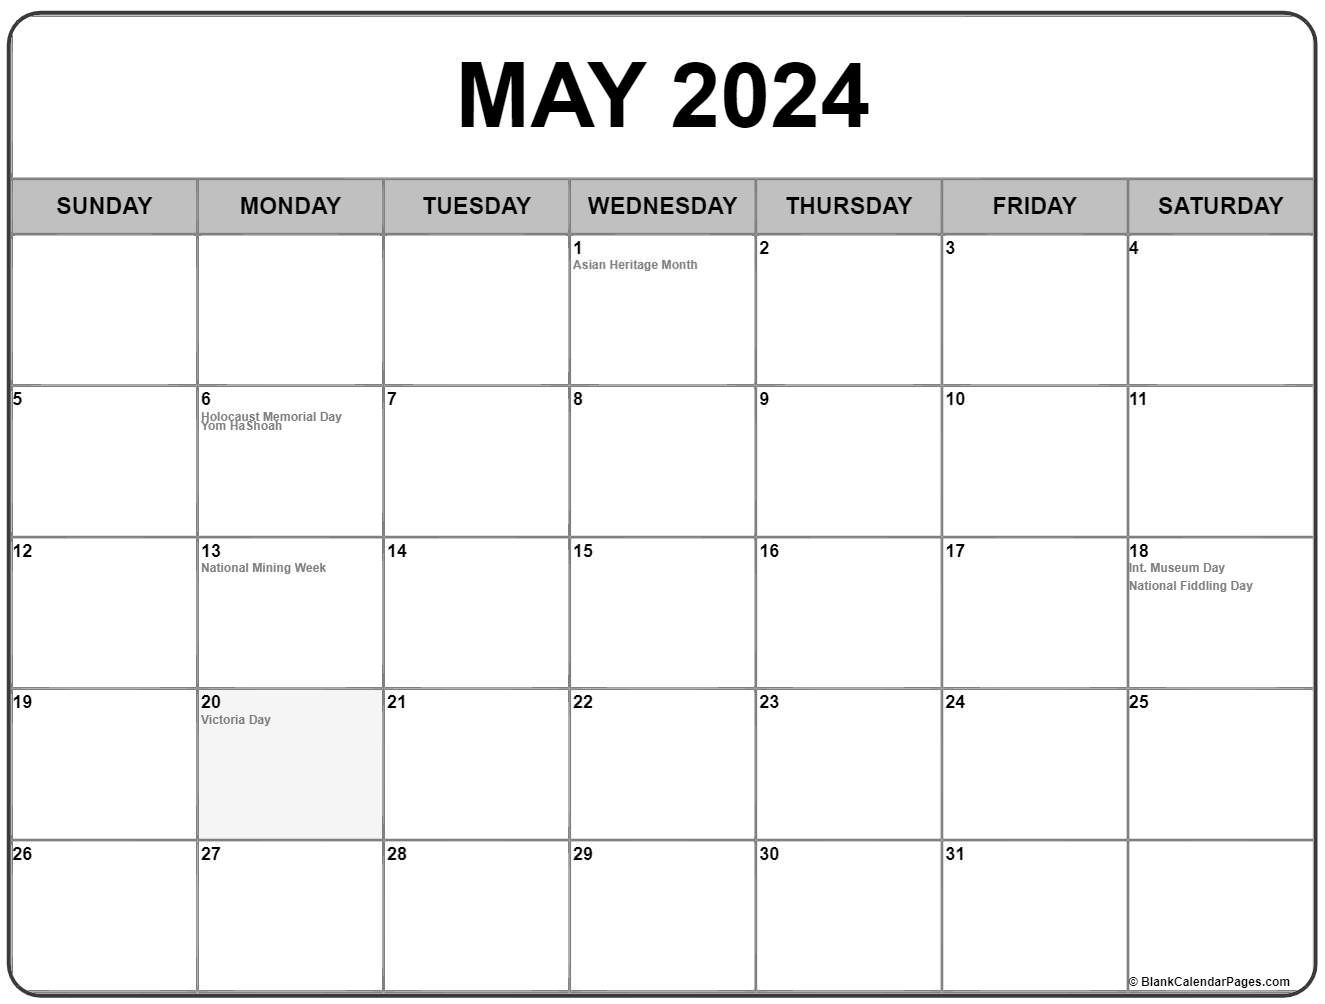 Collection of May 2021 calendars with holidays